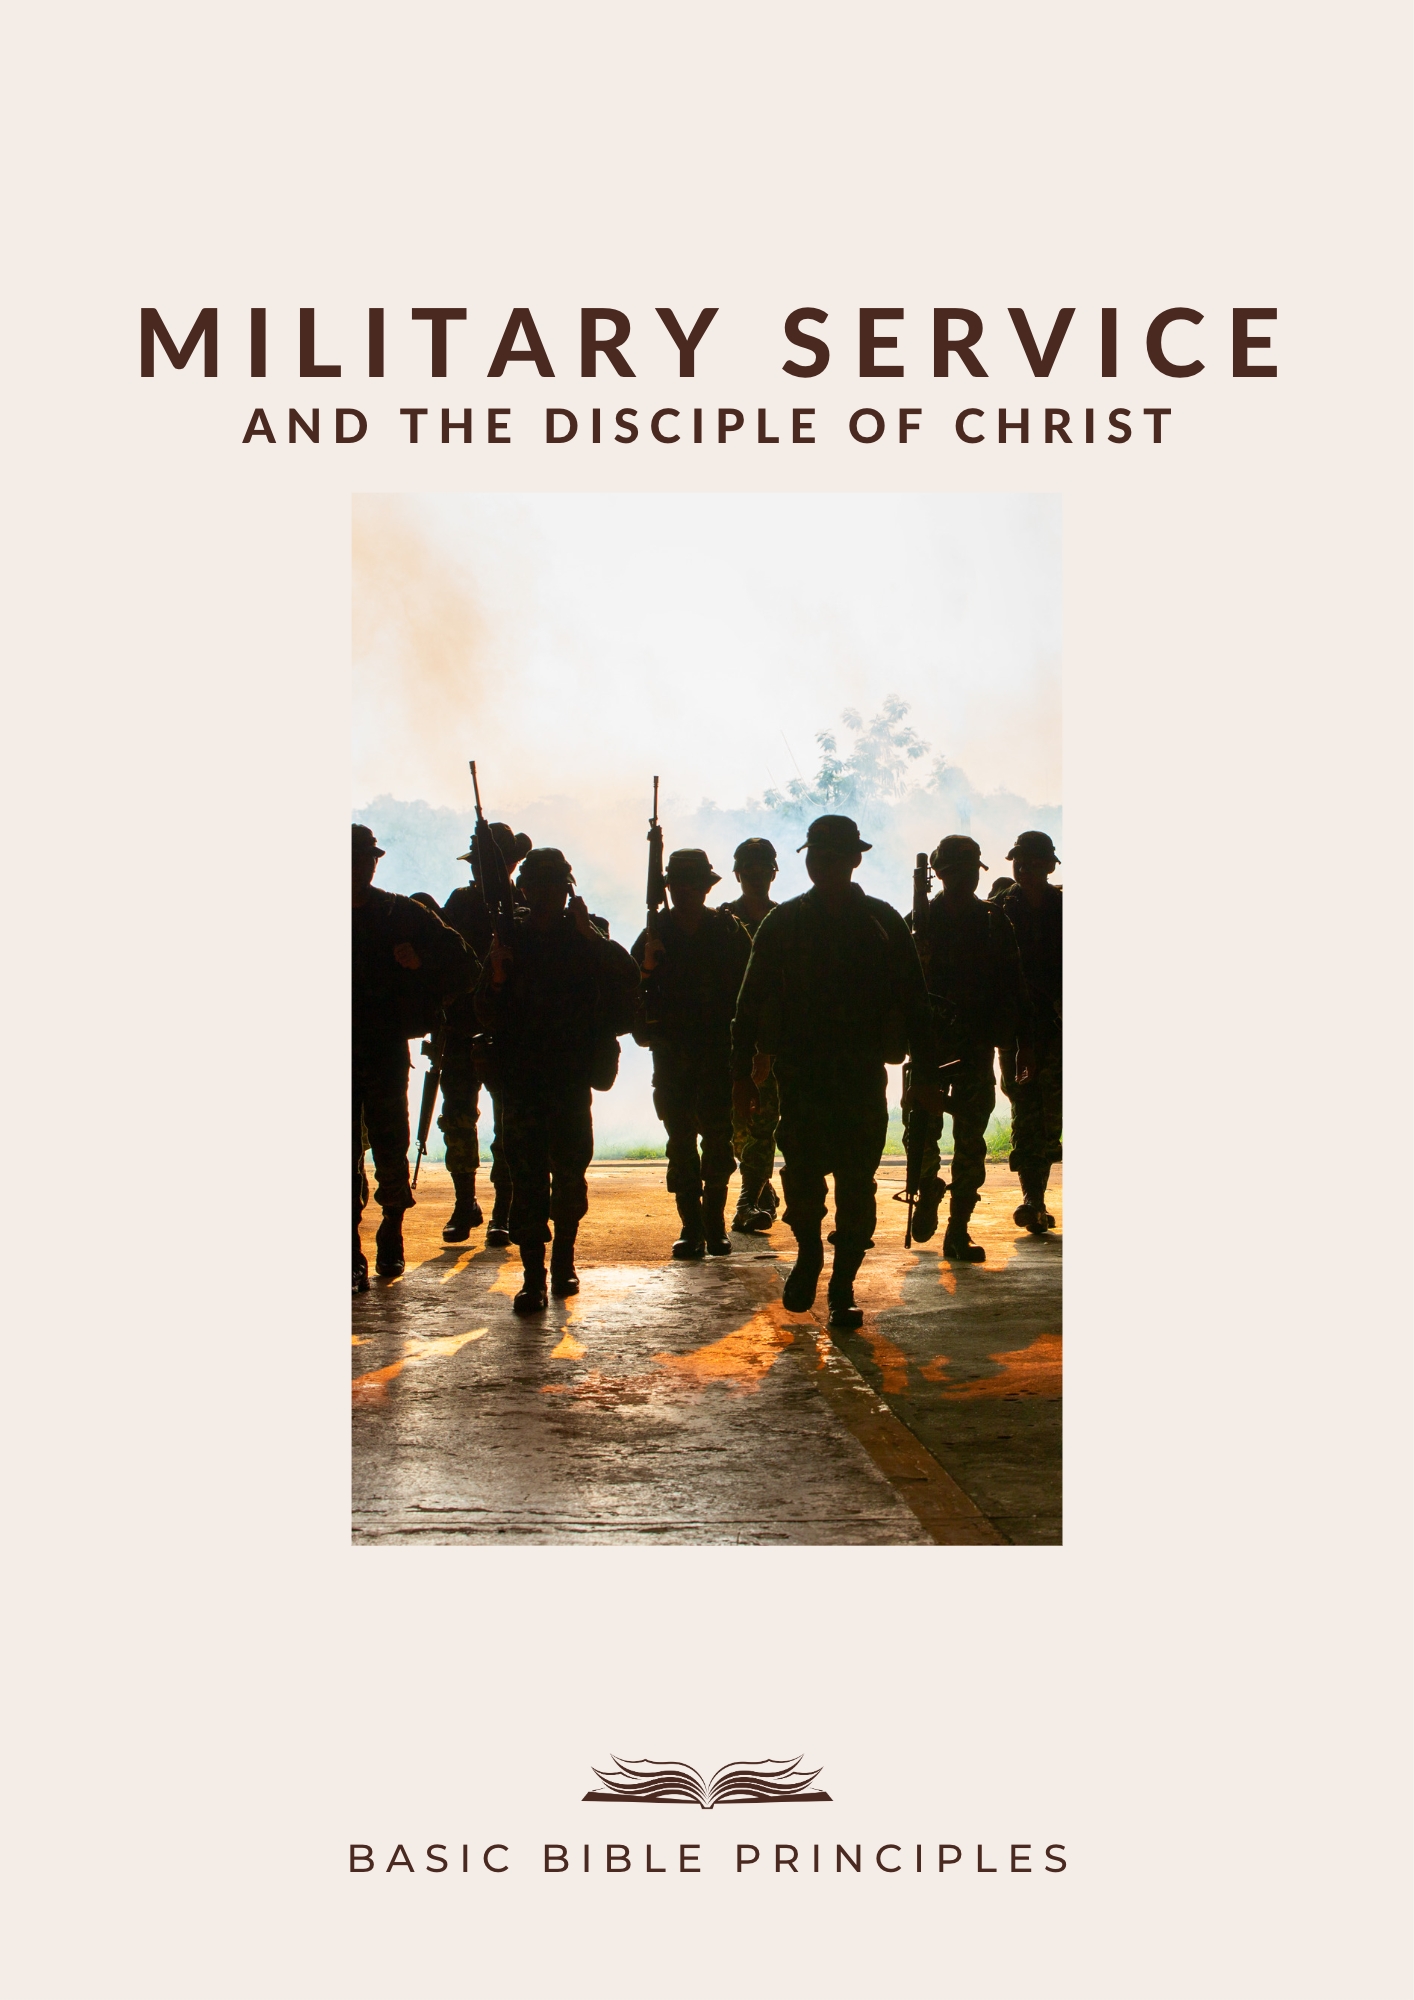 BASIC BIBLE PRINCIPLES: MILITARY SERVICE AND THE DISCIPLE OF CHRIST